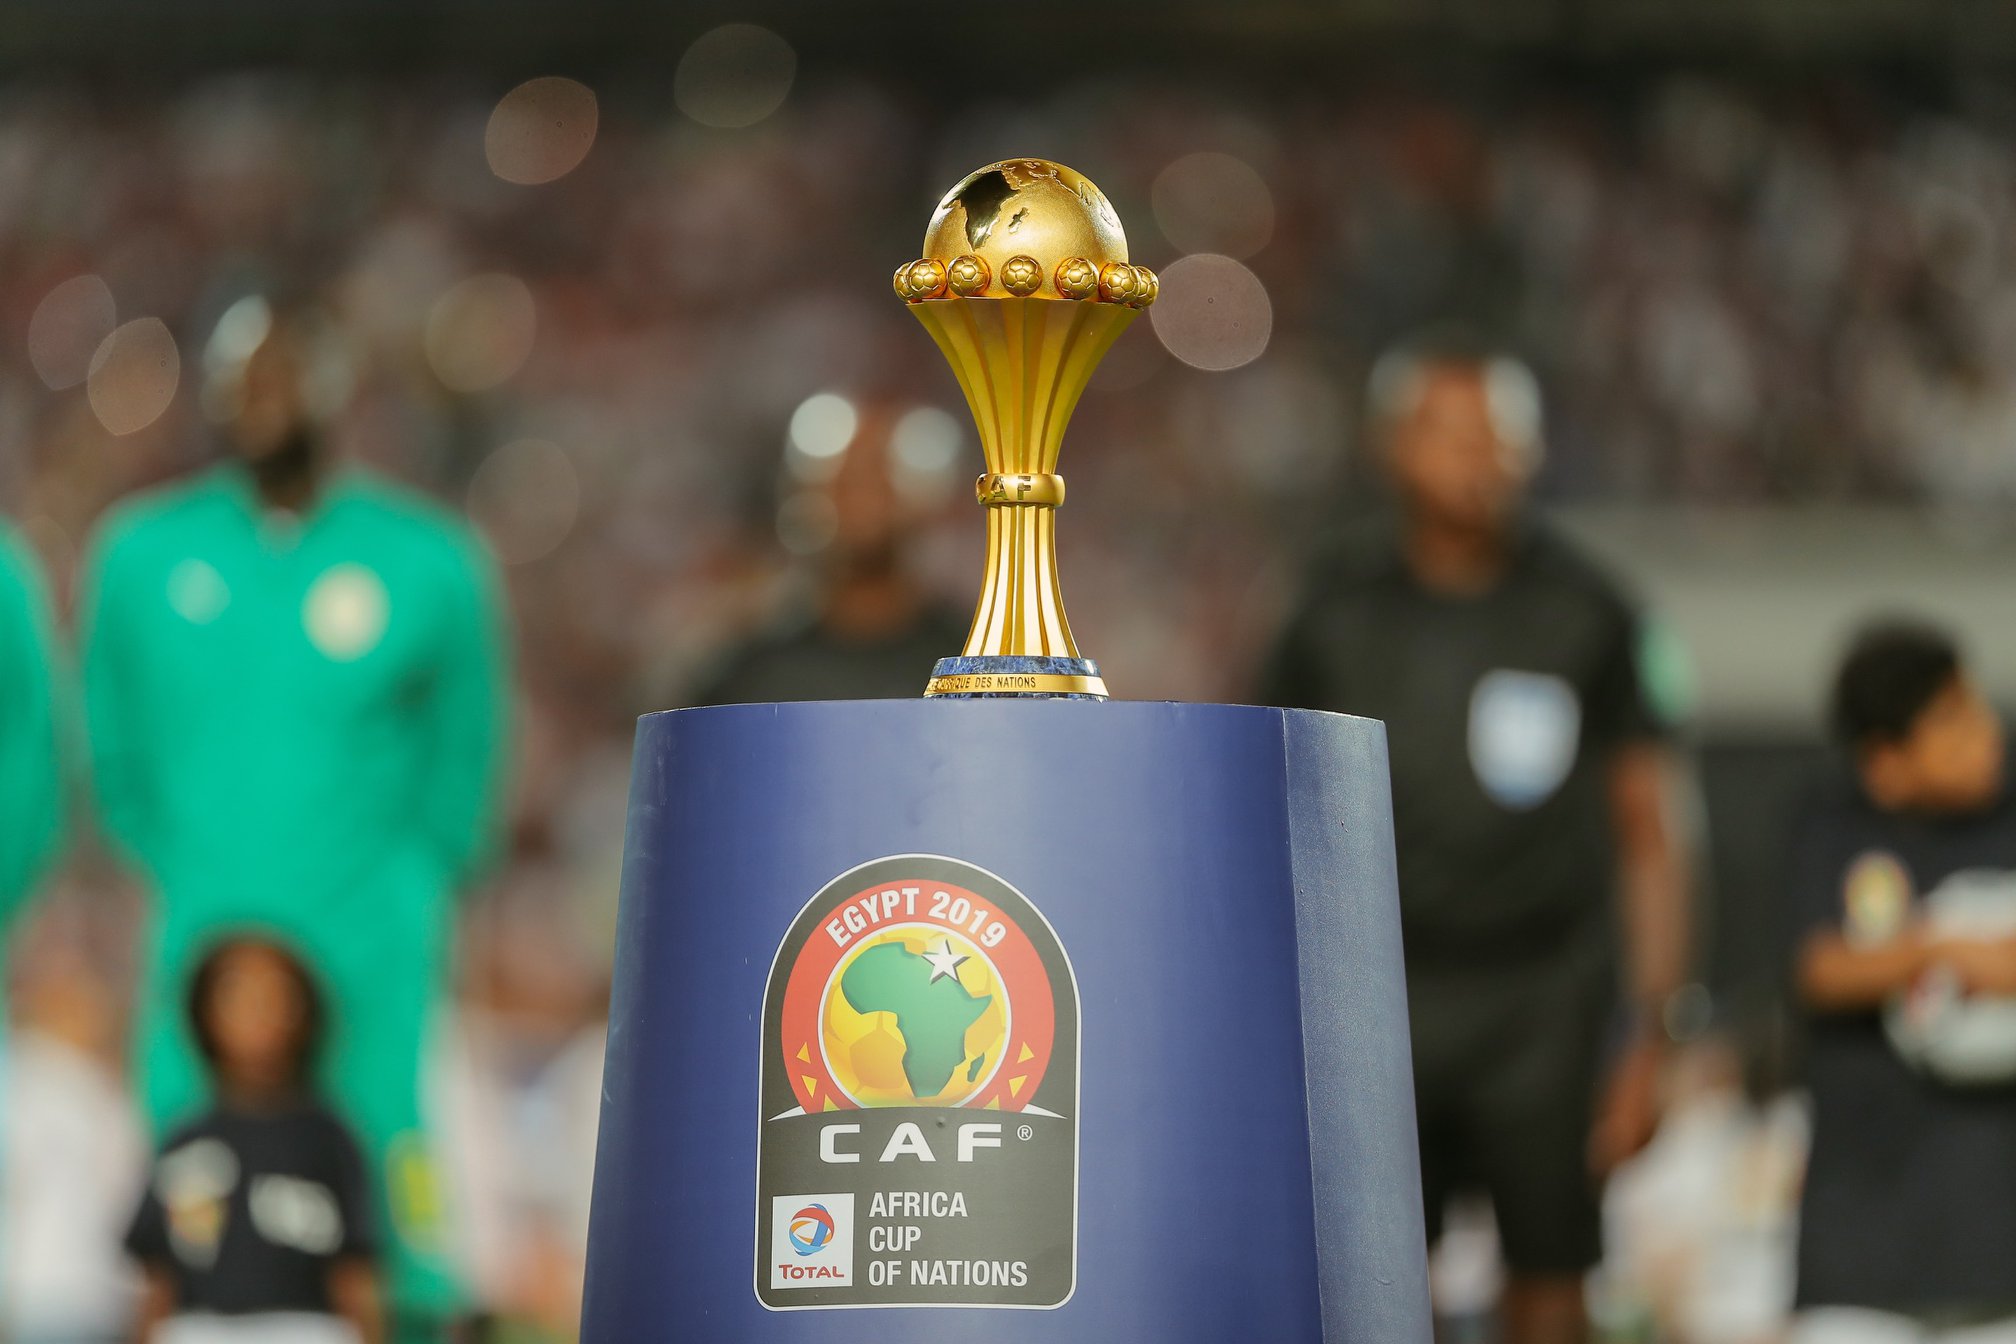 Only One Nigerian Referee Selected As African Football Body, CAF Names 63 Officials For Nations’ Cup Tournament